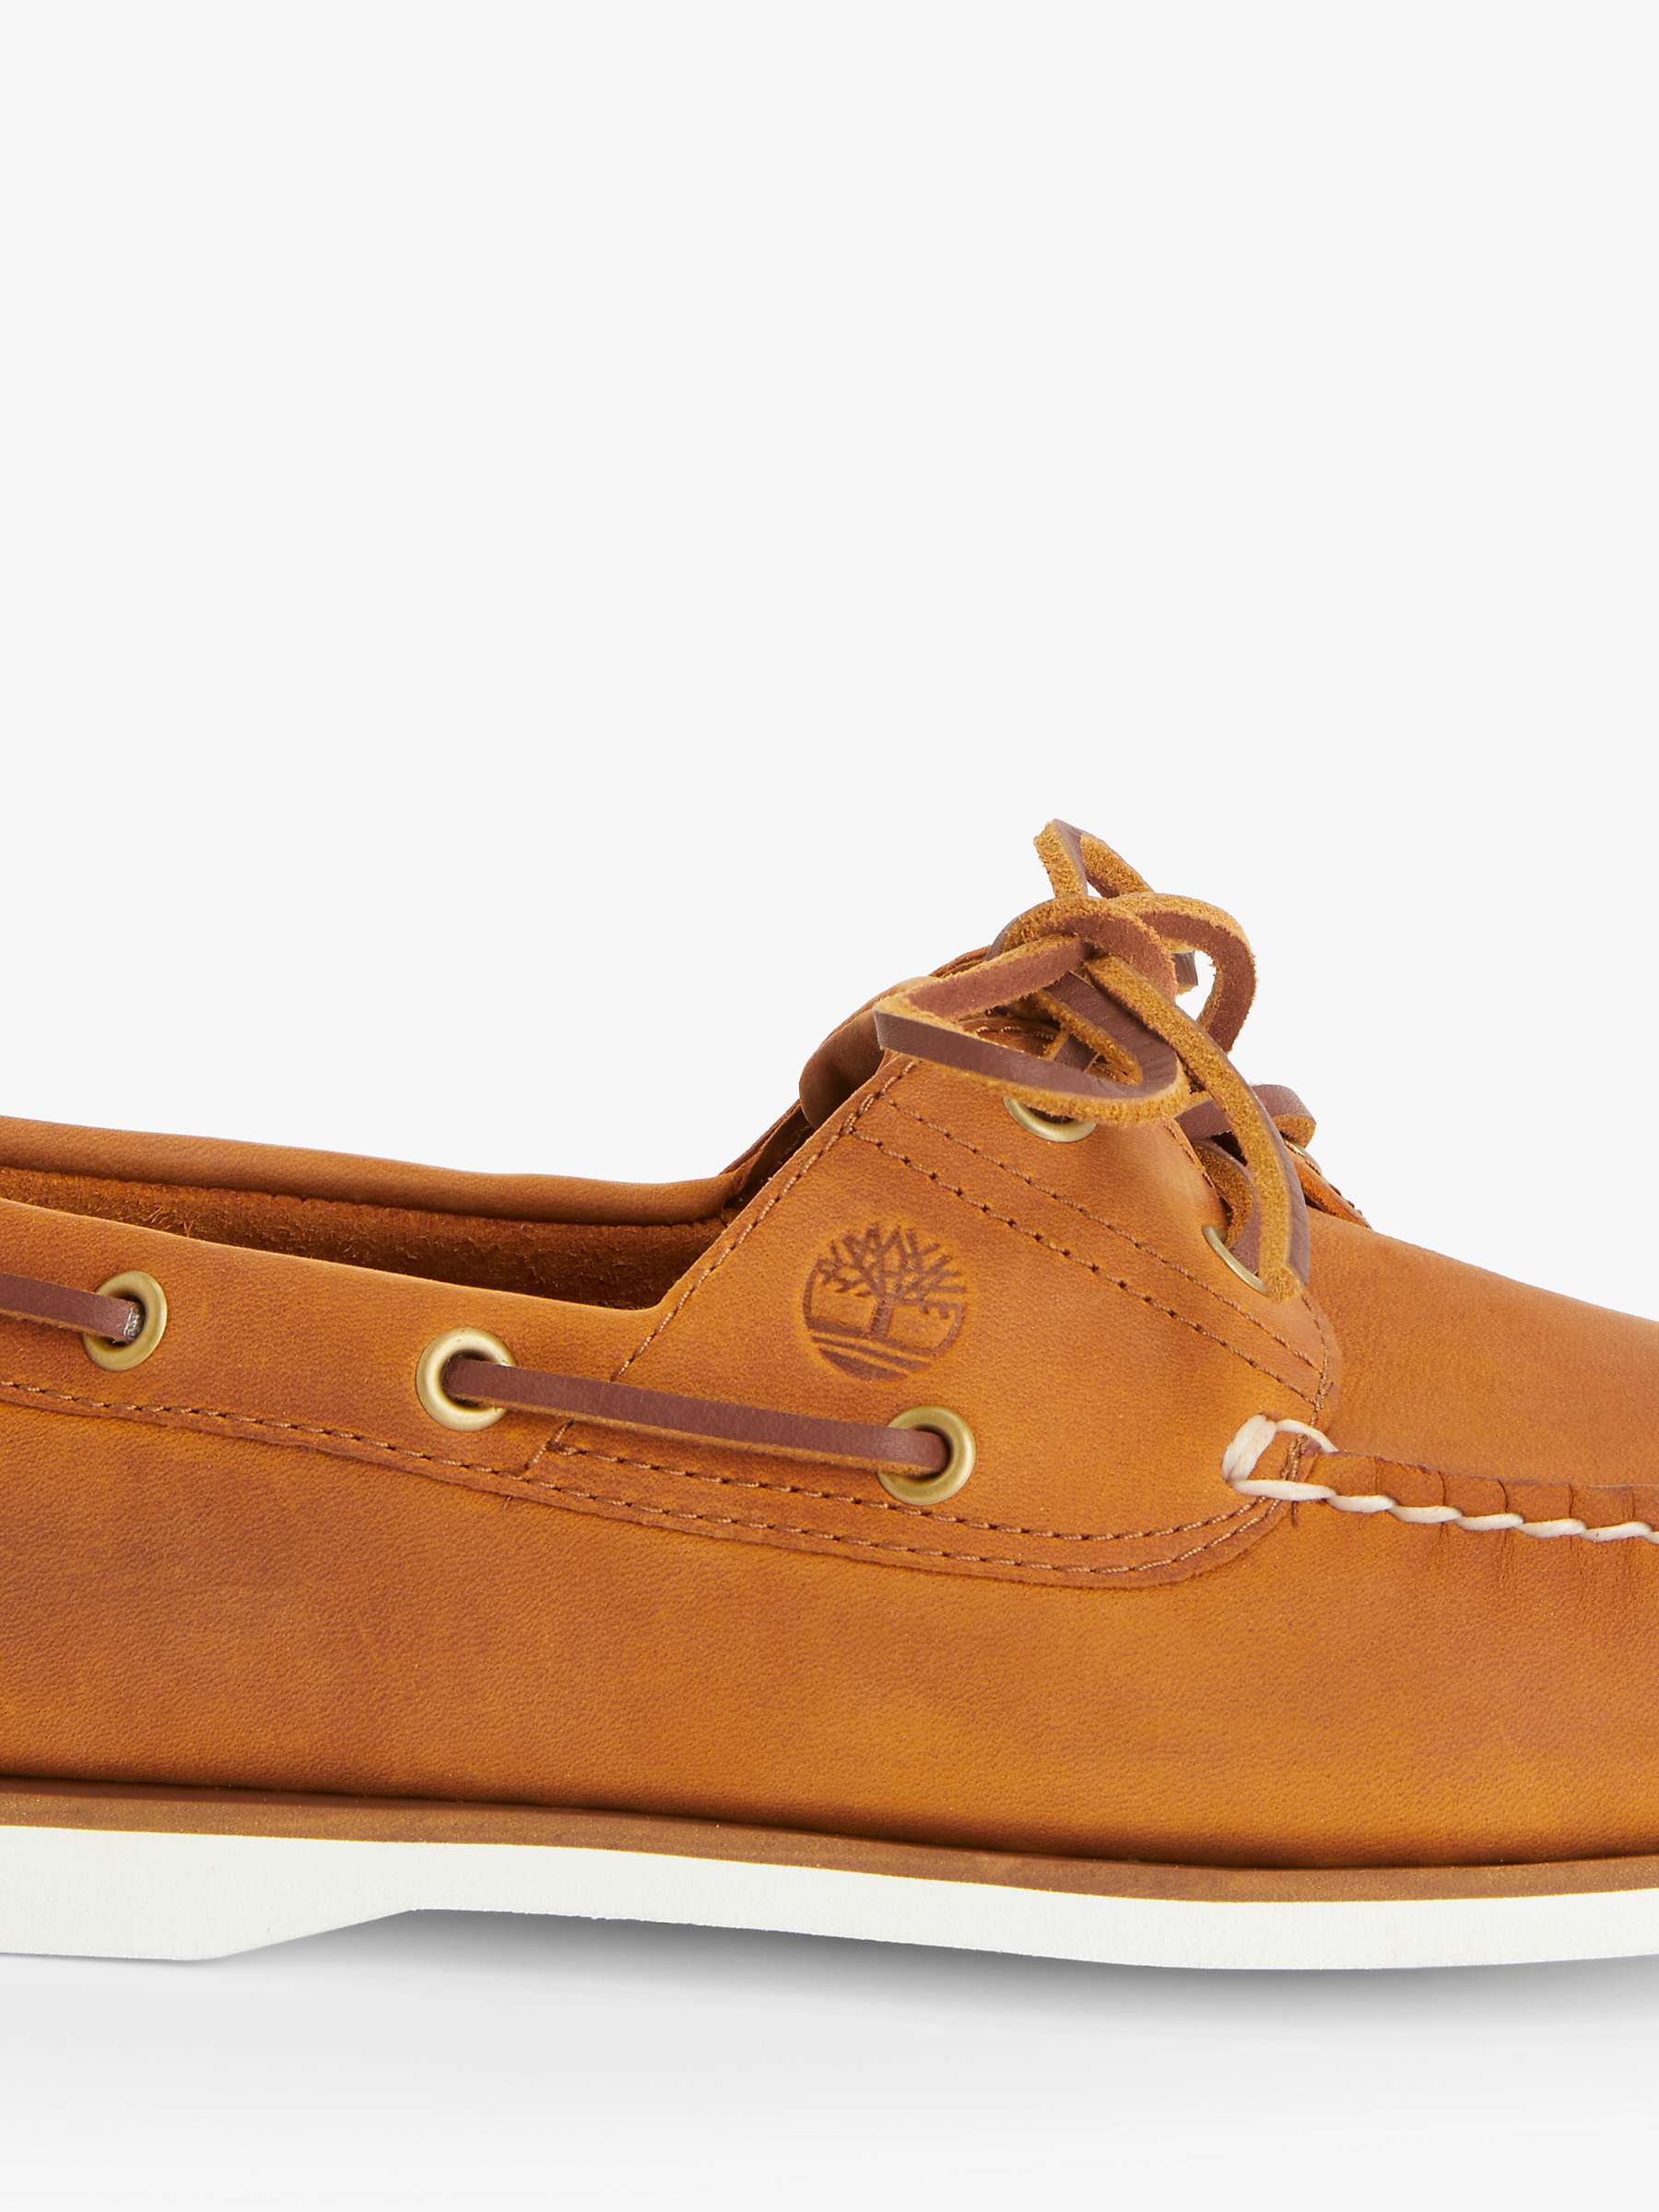 Timberland 2 Leather Boat Shoes, at John Lewis & Partners